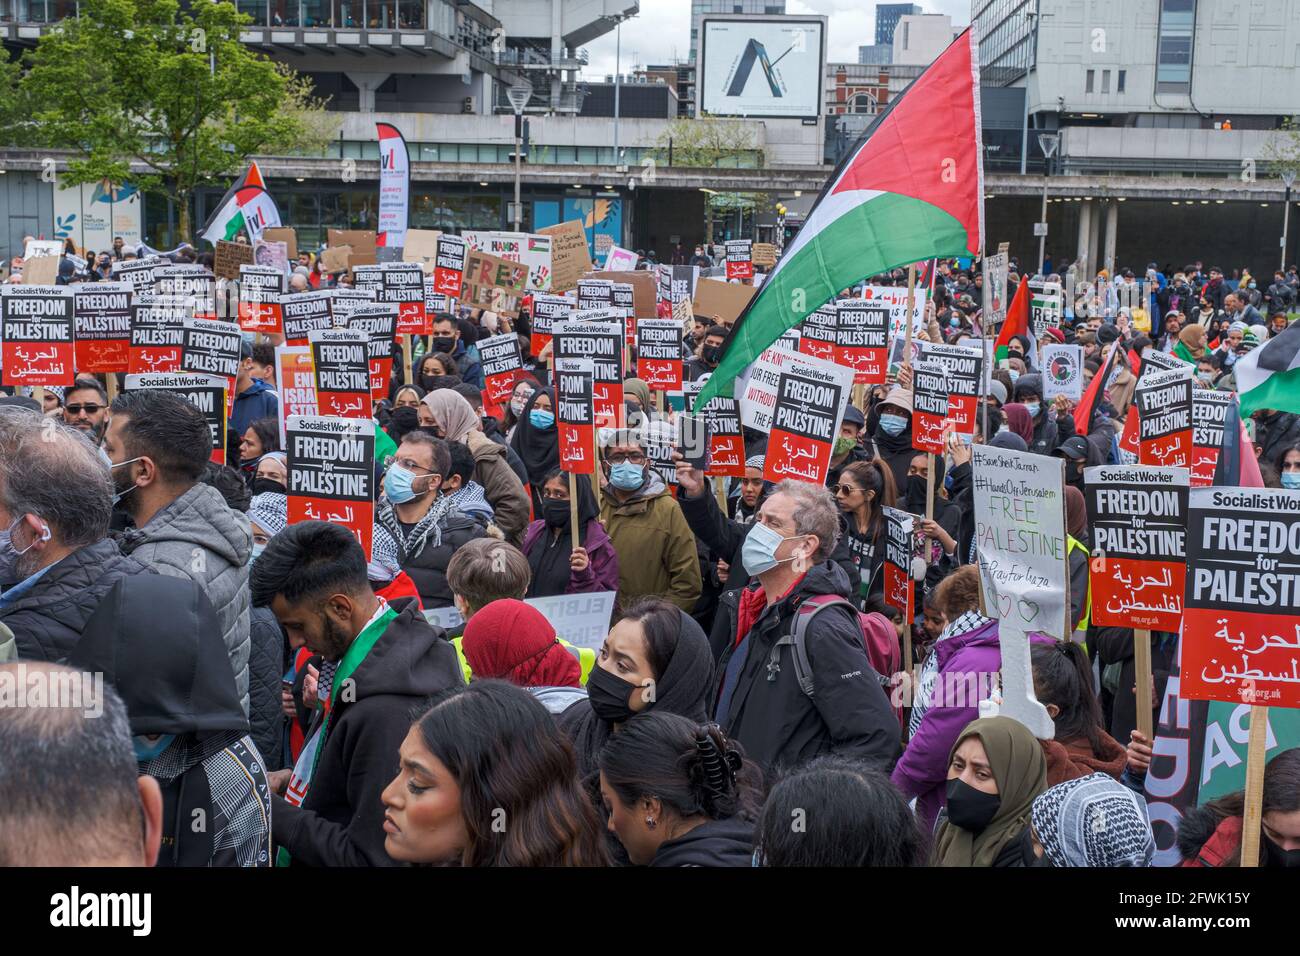 Protestors gather at Piccadilly Gardens, Manchester UK, 22 May 2021 .Picture: Alvaro Velazquez. www.worldwidefeatures.com./ Stock Photo